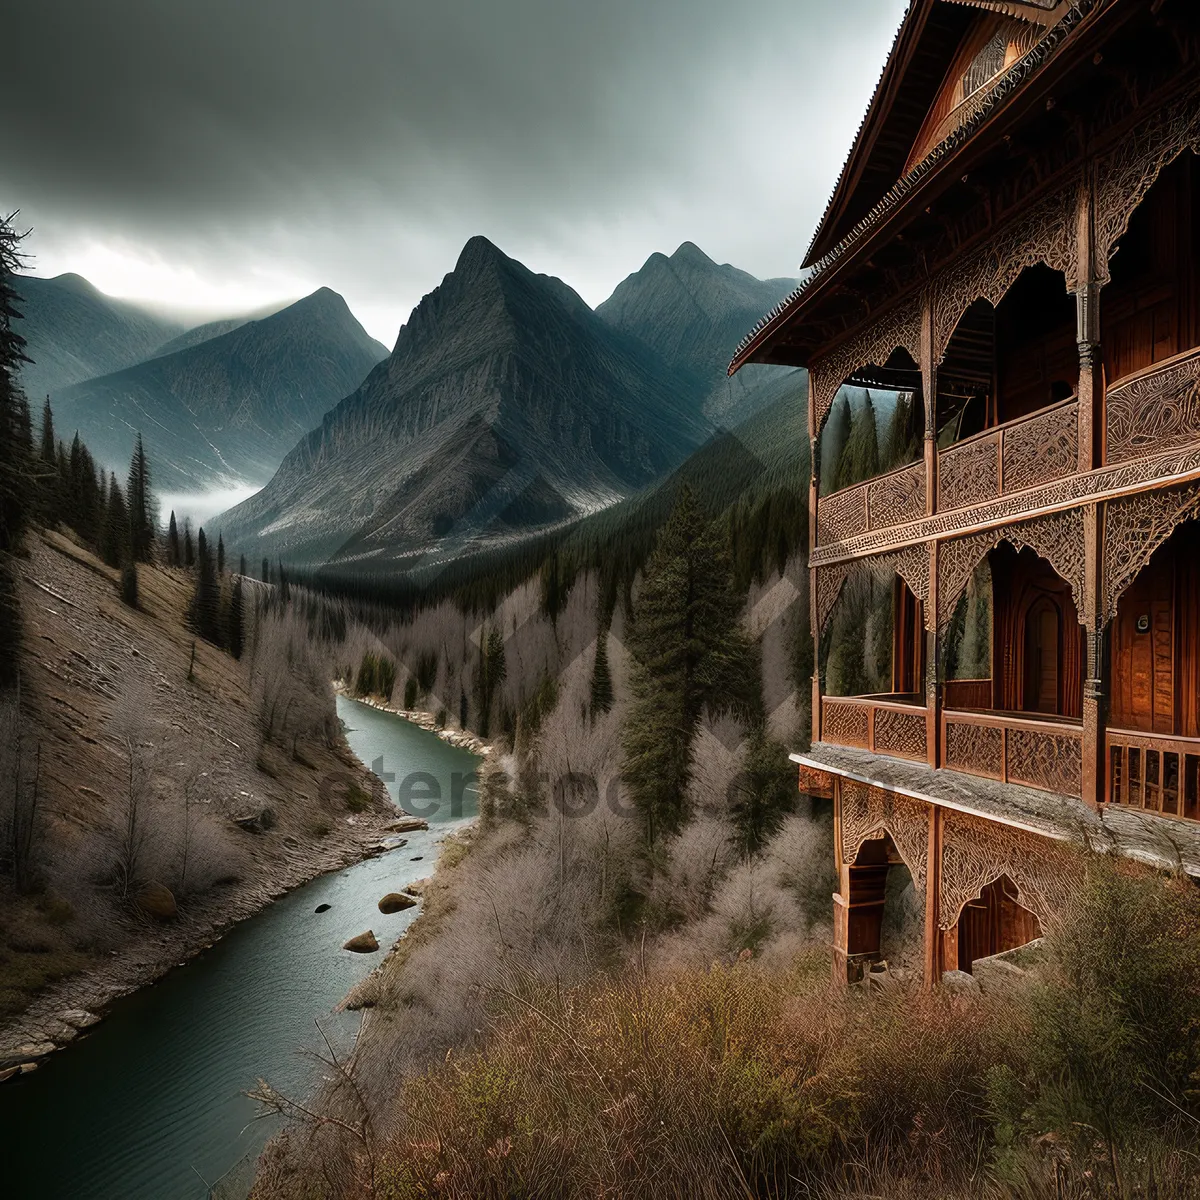 Picture of Majestic Mountain Castle overlooking Serene River